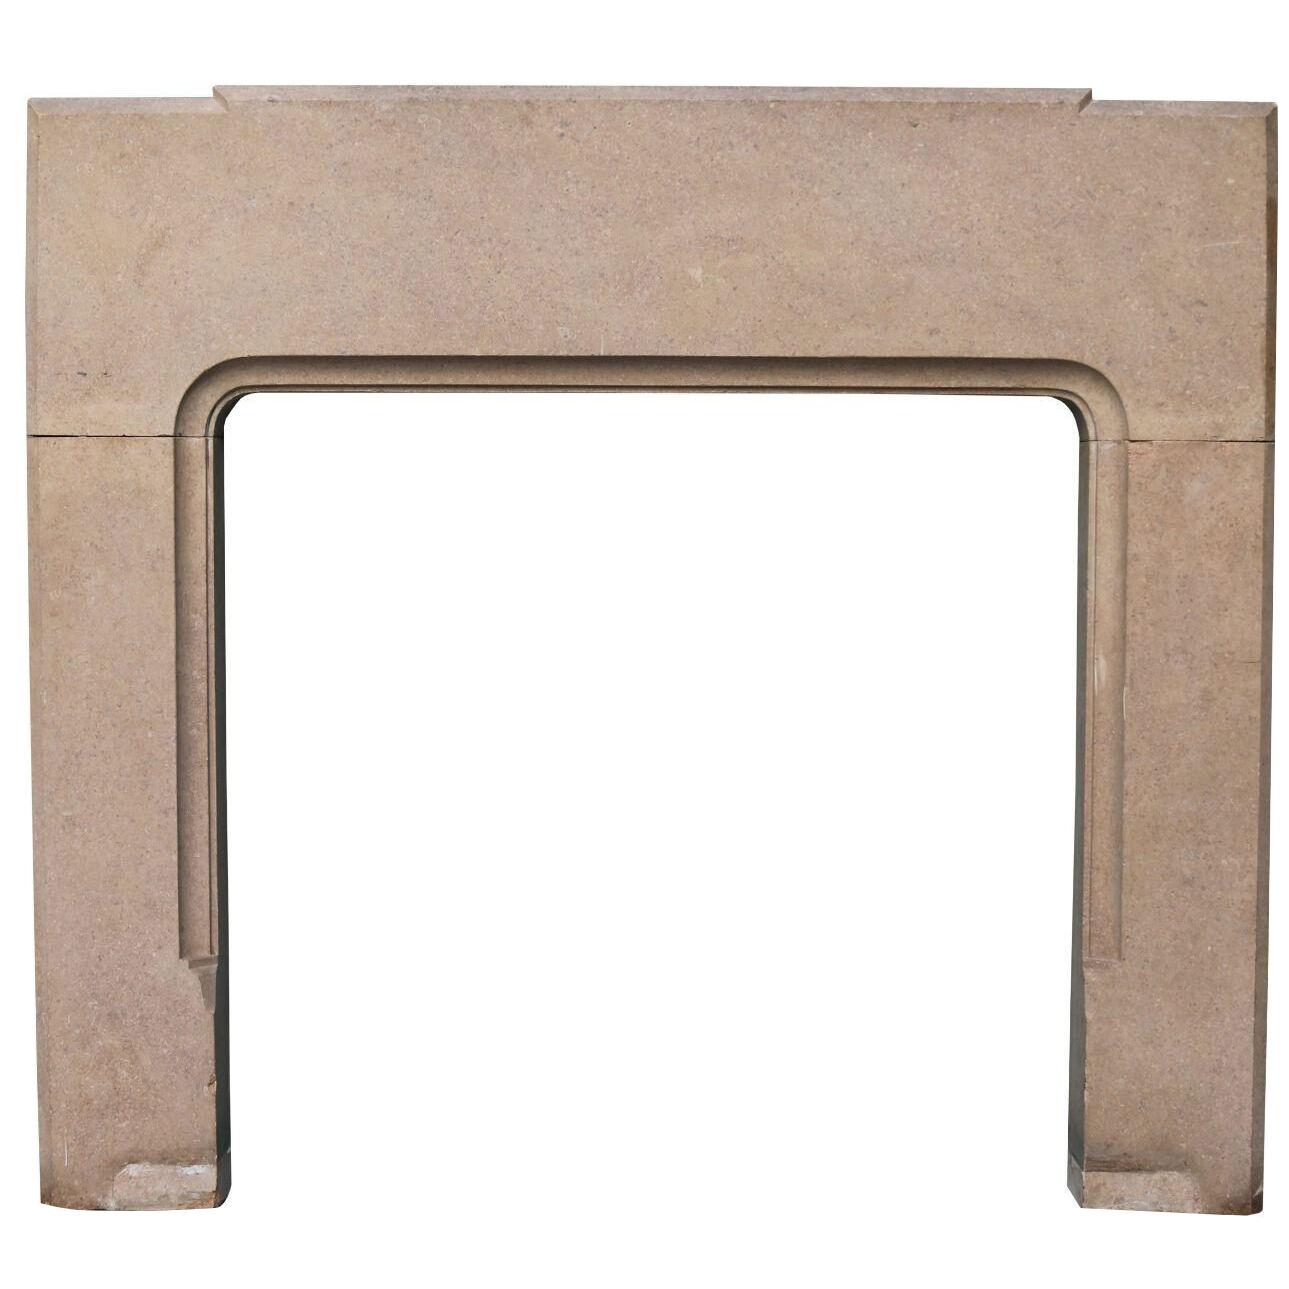 A Reclaimed 1920s Fossilised Limestone Fire Surround